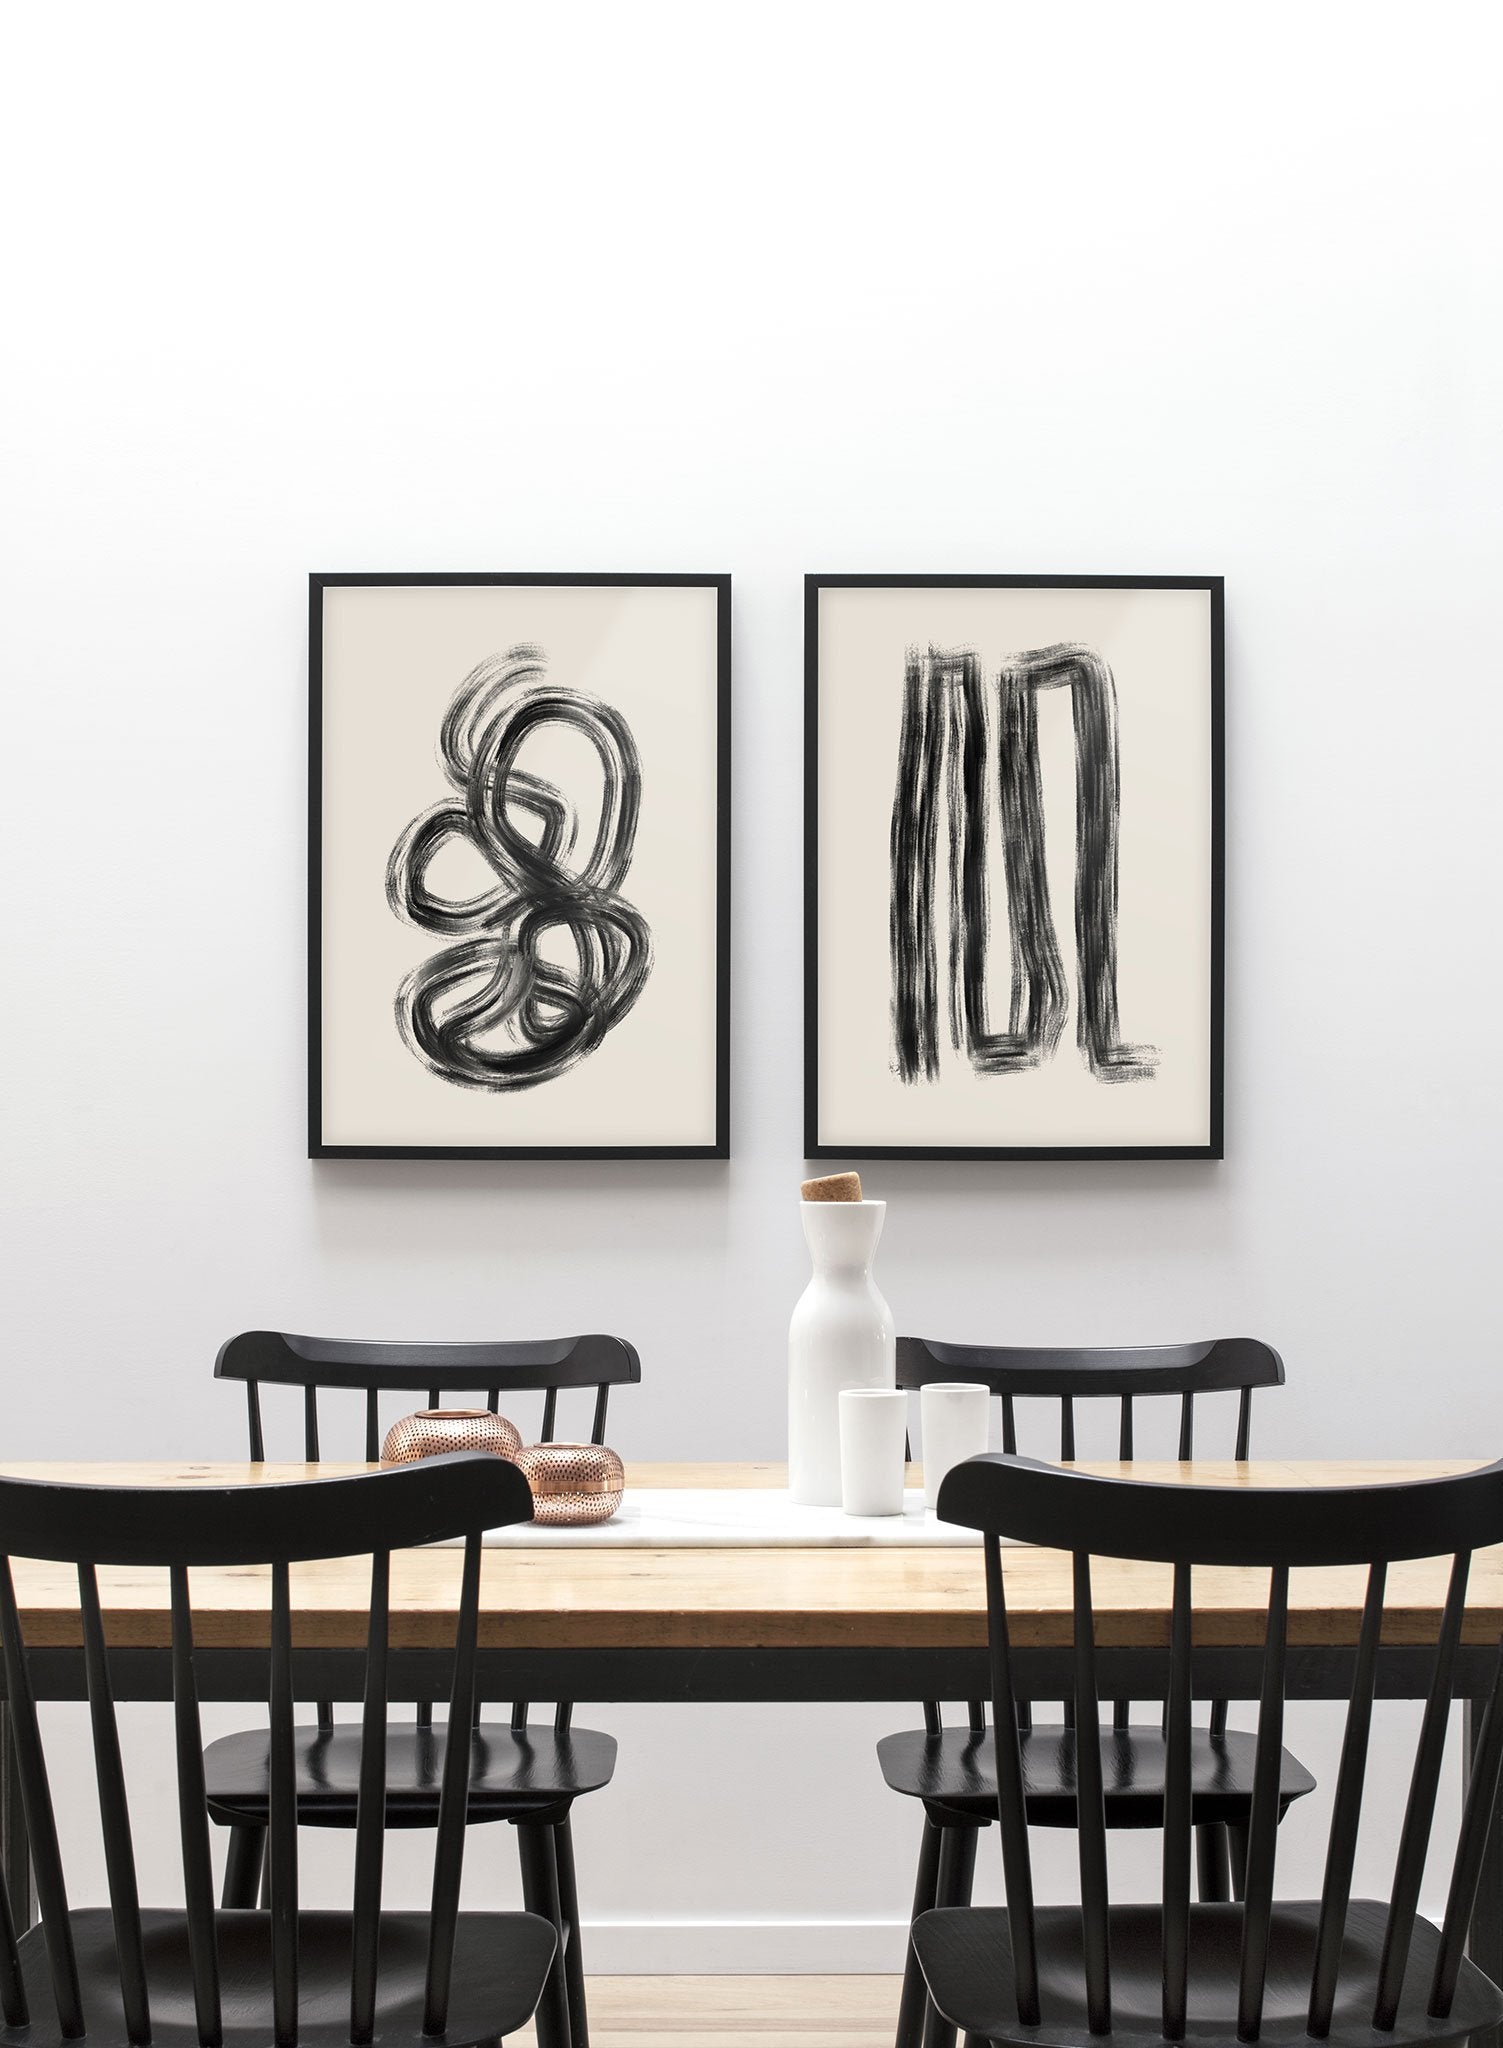 Modern minimalist poster by Opposite Wall with abstract design of Dead Ends by Toffie Affichiste - Gallery Wall Duo - Dining Room